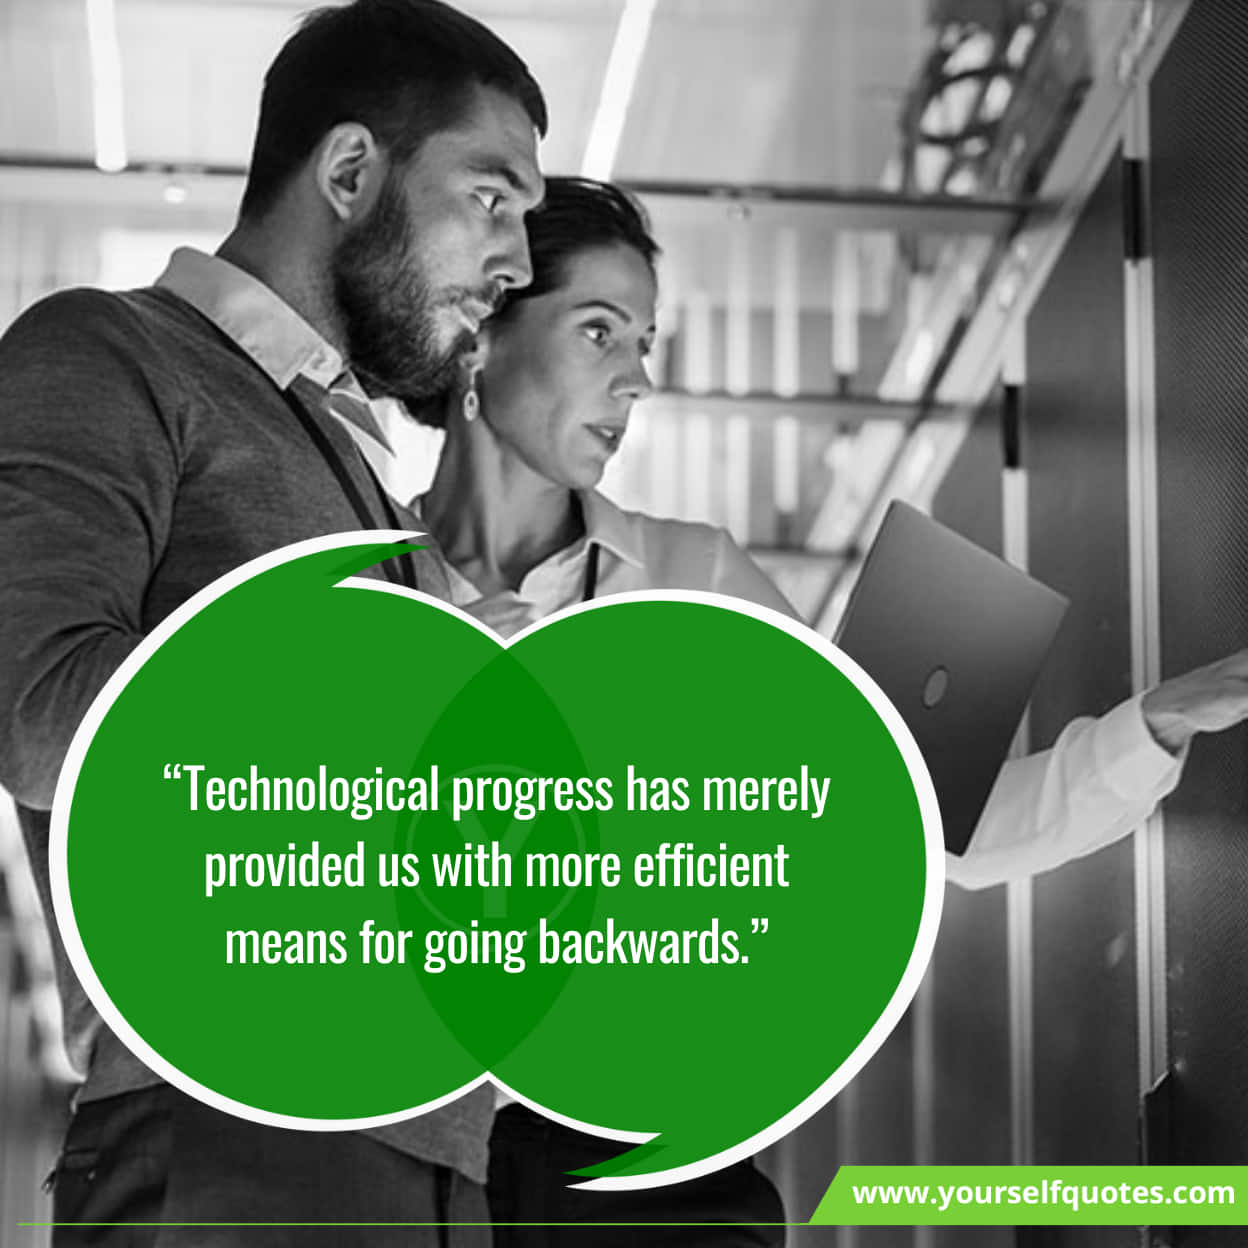 Best Quotes On Technology